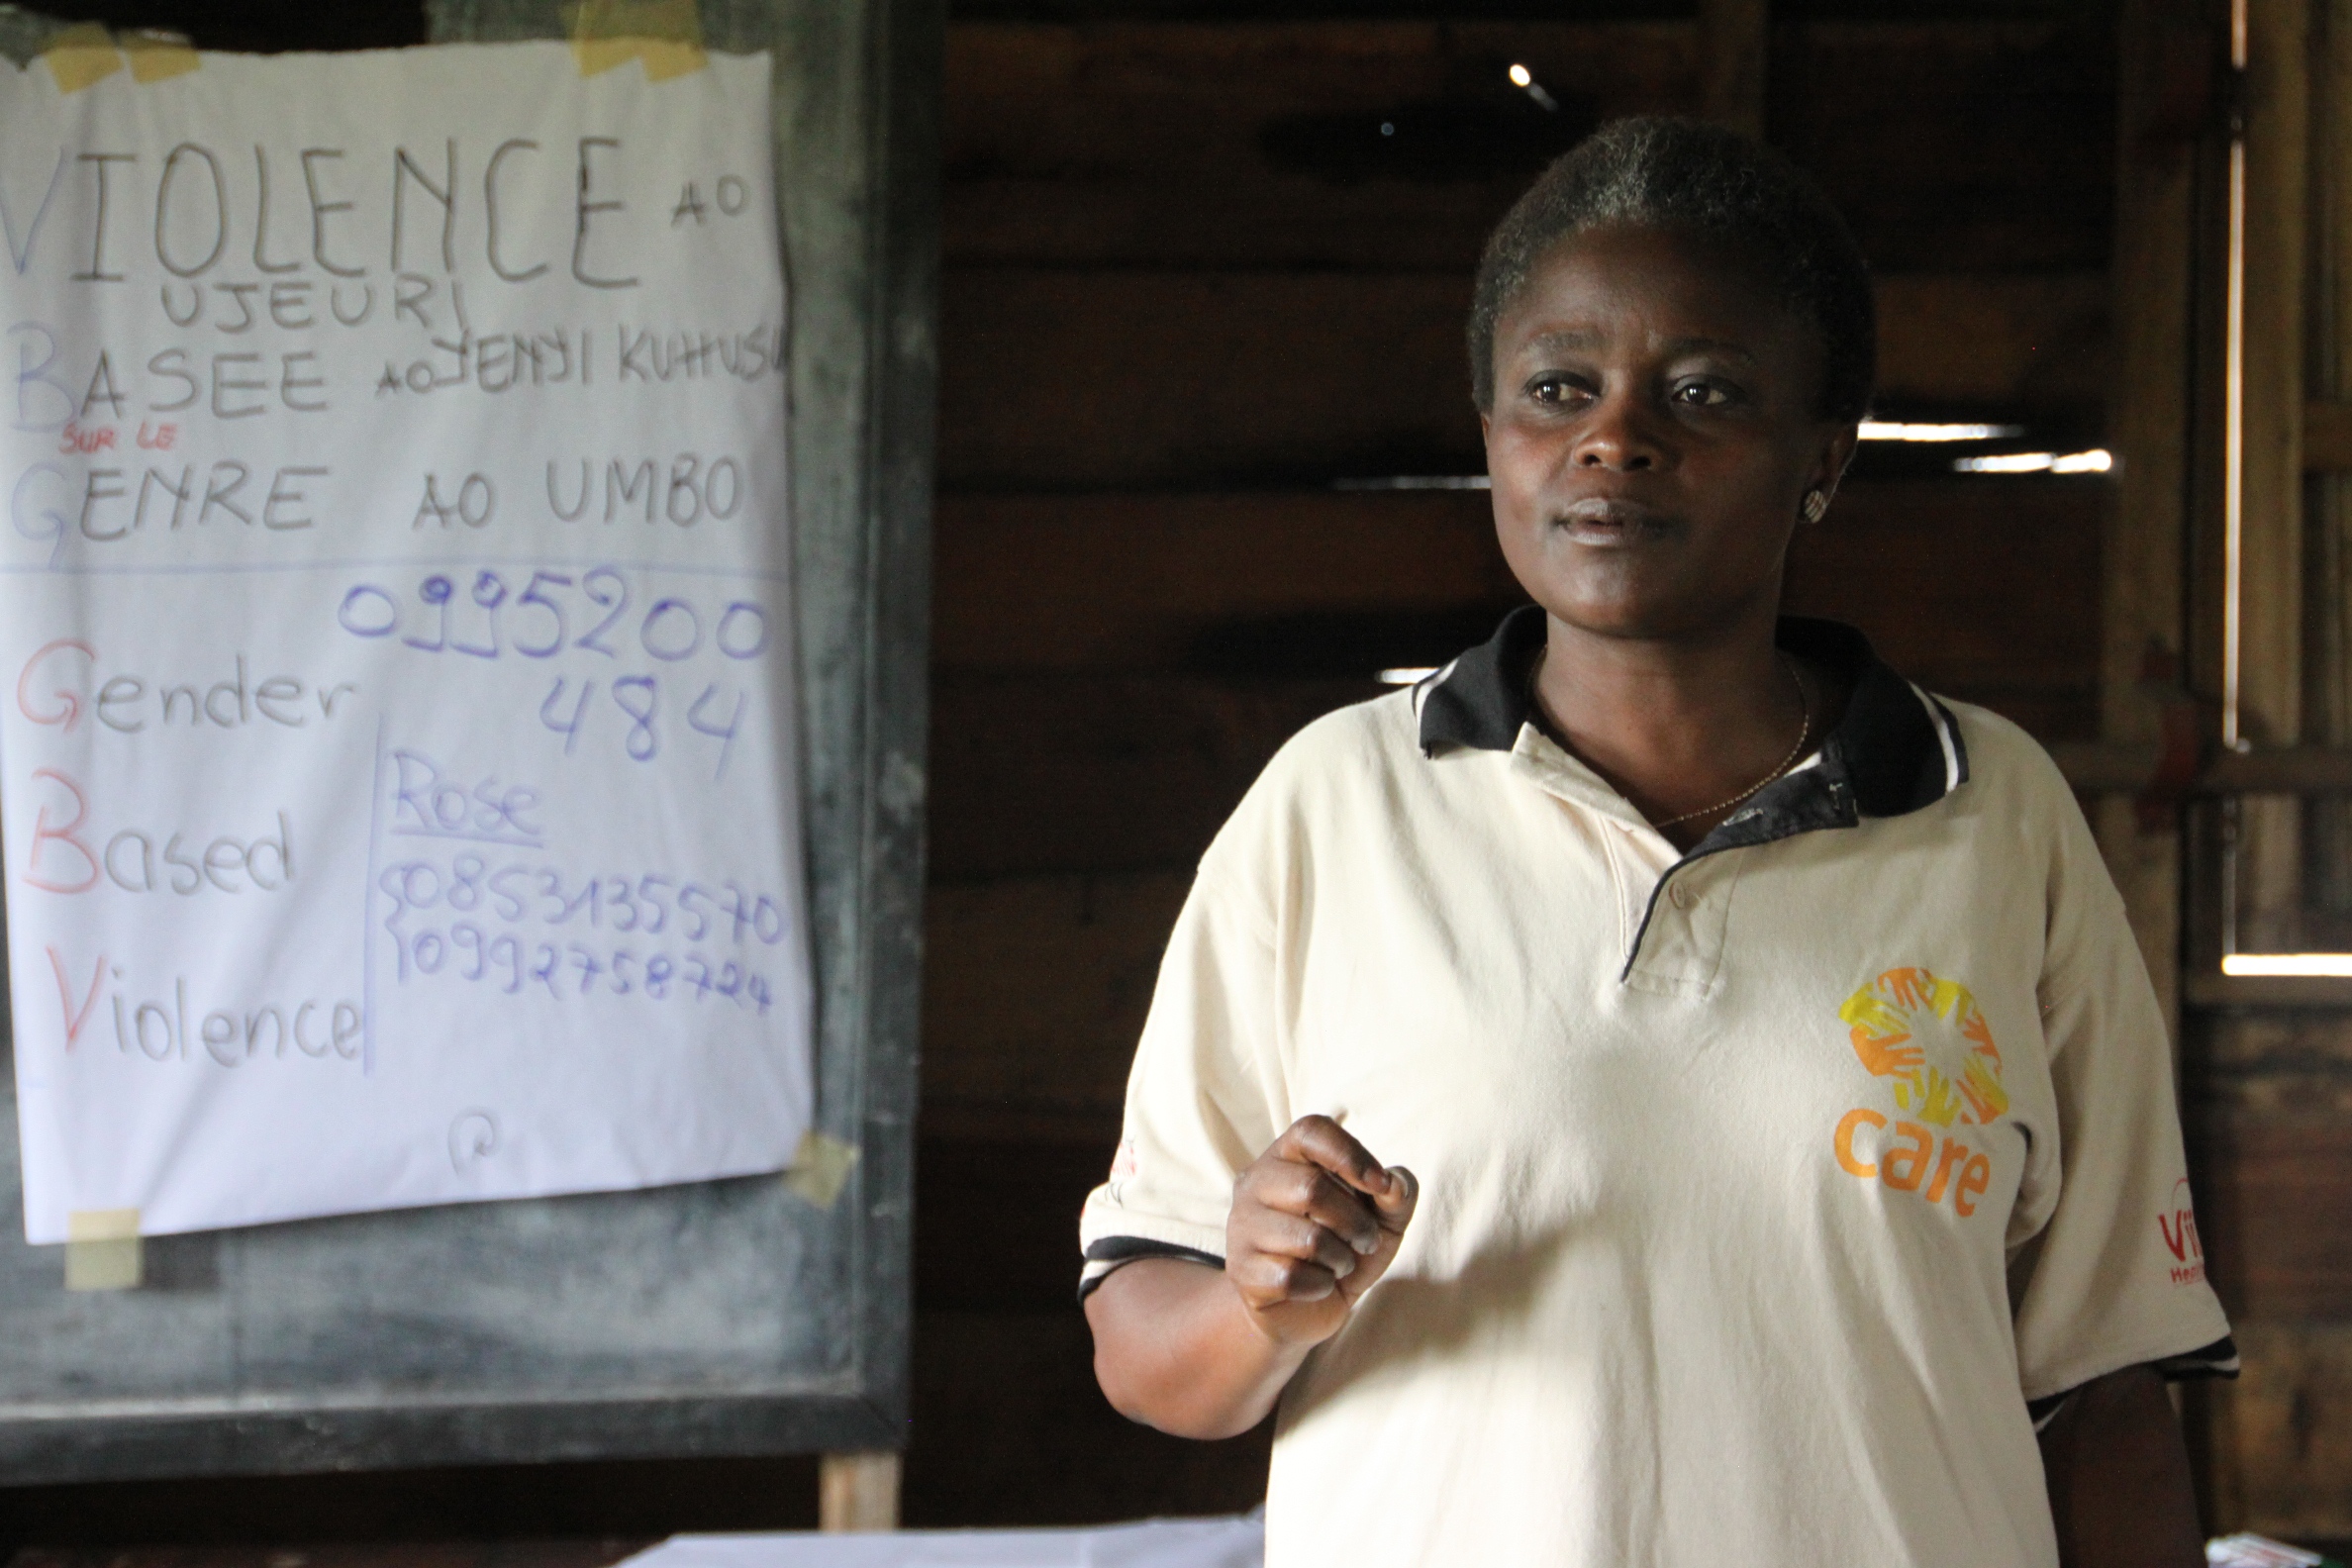 Rose Vive is a CARE staff member in Goma, DRC. She is responsible for a project that uses a community based approach to combat sexual violence and empower women to take care for themselves and their families (Photo: CARE/Sabine Wilke)